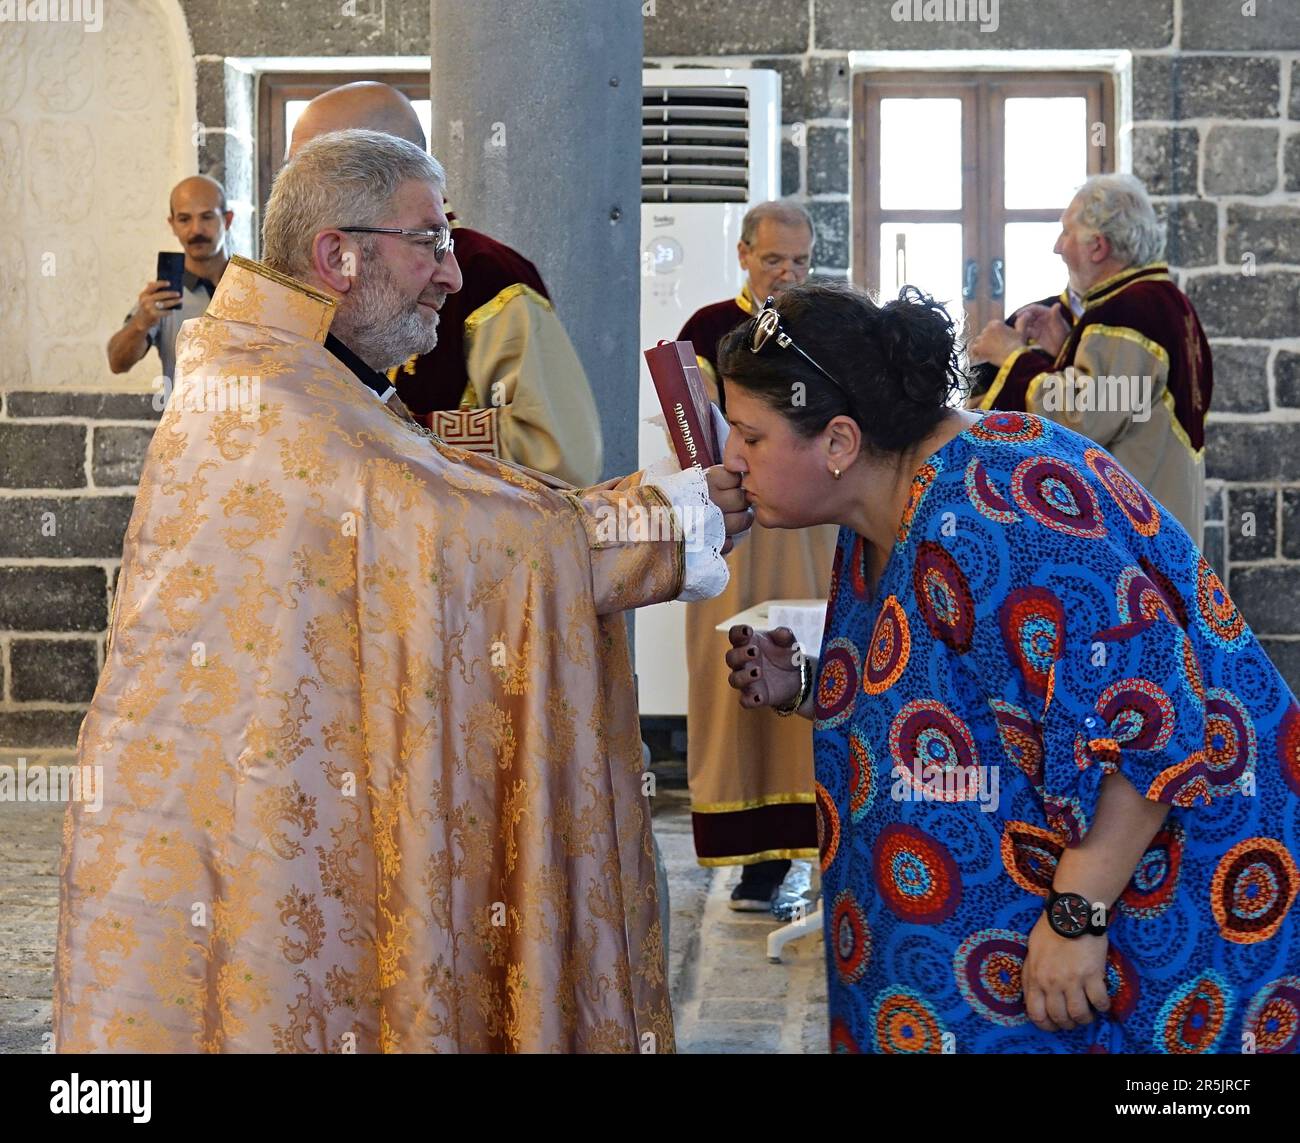 A woman kisses a Bible in the hands of Senior Priest Abraham Firat after the ritual at Diyarbak?r Surp Hovsep Church. At the Surp Hovsep Armenian Catholic Church, which was heavily damaged in clashes between armed Kurdish PKK militants and Turkish security forces in the center of Diyarbakir in 2015 and repaired as a result of a 4-year restoration, the second ritual in the last 100 years after the first ritual in 2021. Very few Armenians who came from Istanbul and lived in Diyarbakir attended the ceremony. The ritual was led by Senior Priest Abraham Firat and Subordinate Deacon Jan Acemoglu, wh Stock Photo